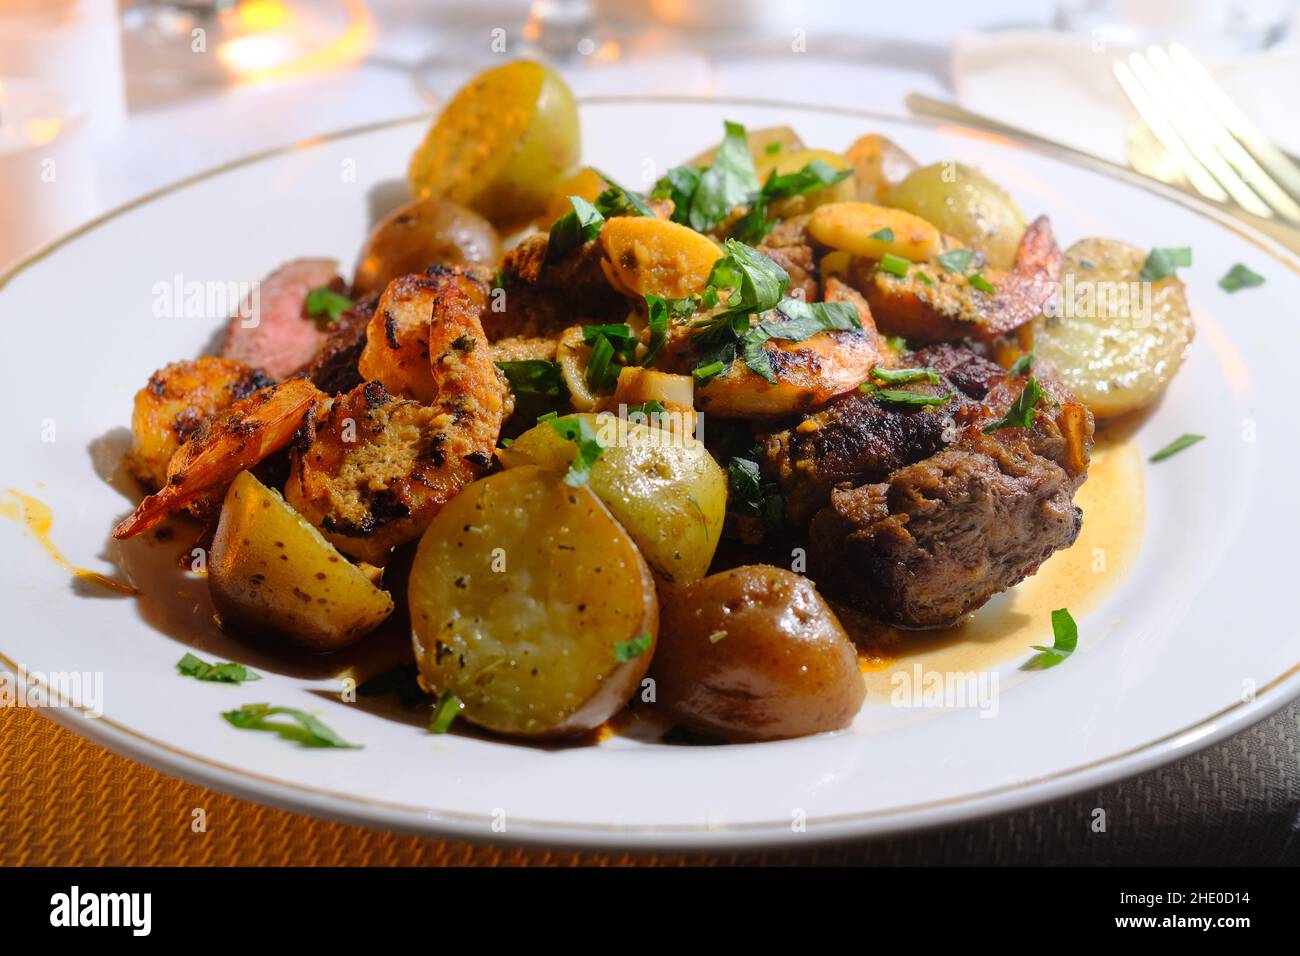 Gourmet surf and turf cajun shrimp and steak dinner entree with new potatoes at a fancy expensive wedding Stock Photo